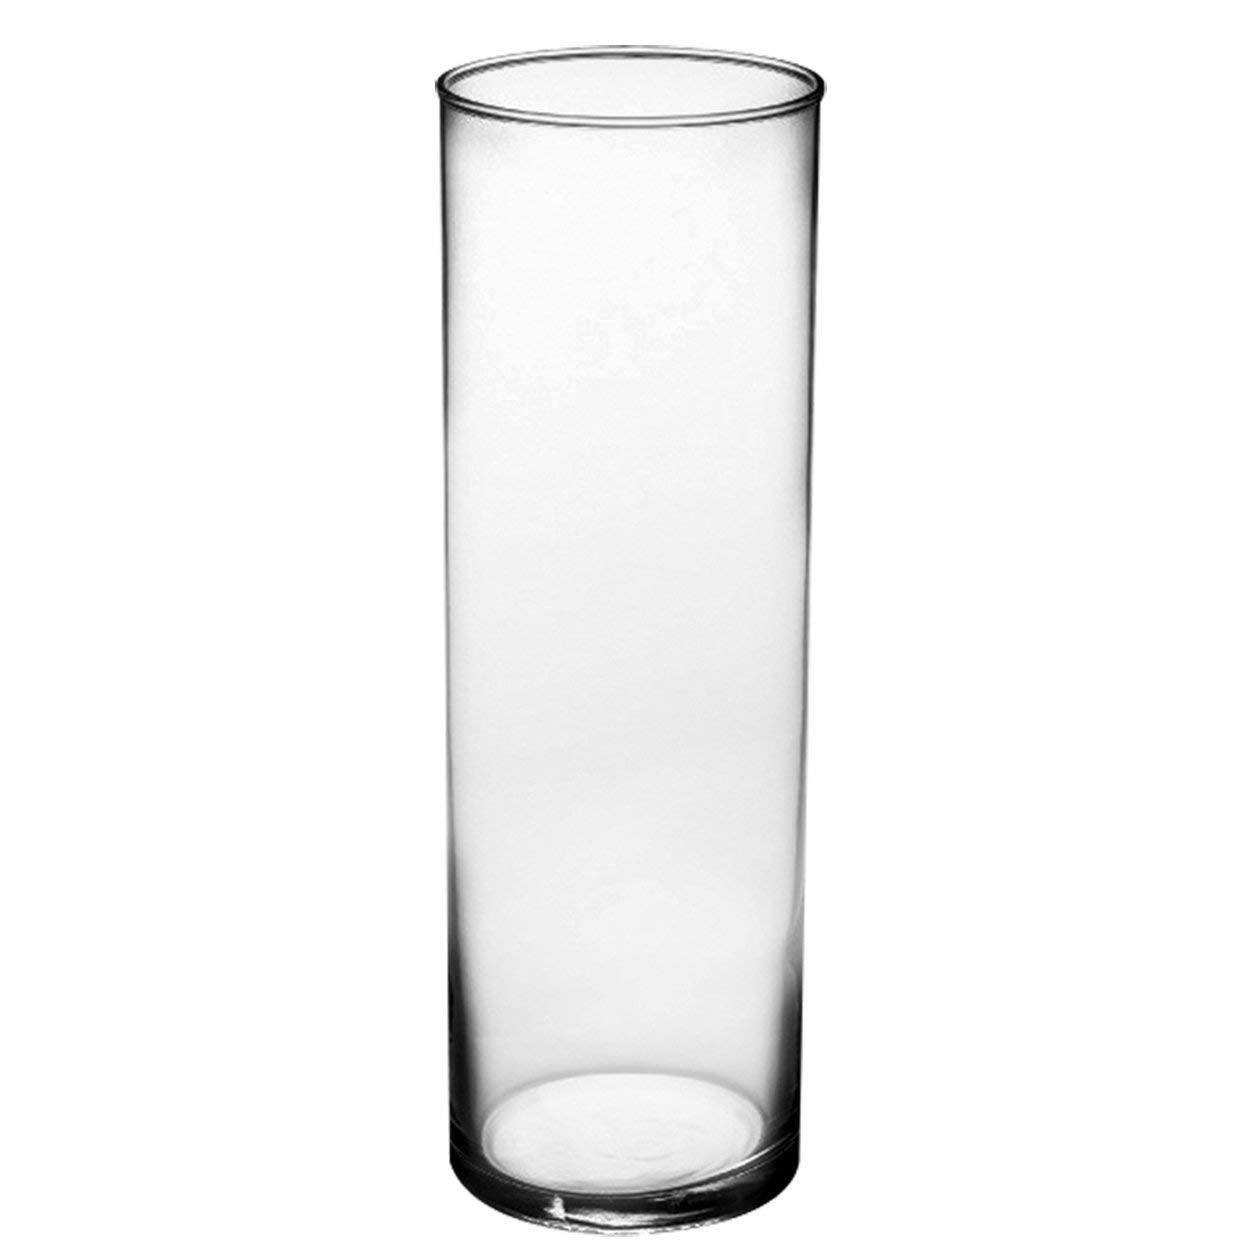 25 Stylish 10 Inch Clear Glass Vases 2024 free download 10 inch clear glass vases of amazon com syndicate sales 3 1 2 x 10 1 2 cylinder vase clear regarding amazon com syndicate sales 3 1 2 x 10 1 2 cylinder vase clear planters garden outdoor